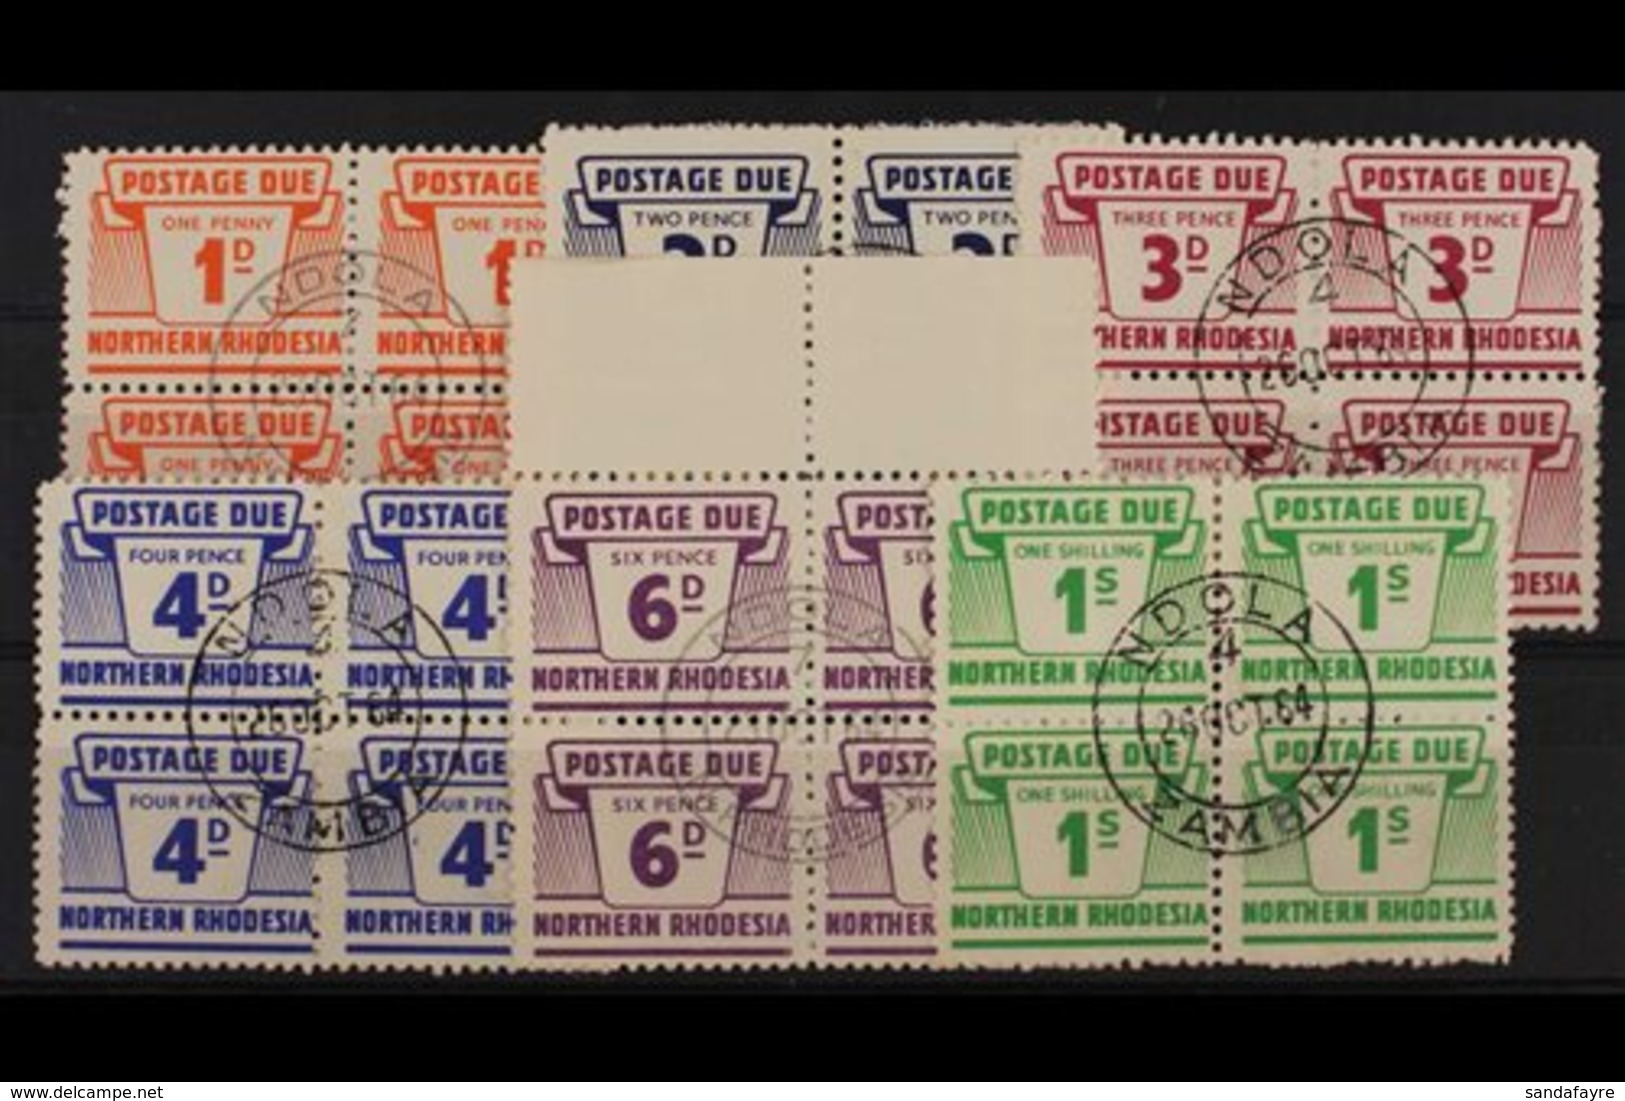 POSTAGE DUES  1963 Complete Set In BLOCKS OF FOUR, SG D5/10, Very Fine Used With Central C.d.s. Postmarks (6 Blocks). Fo - Northern Rhodesia (...-1963)